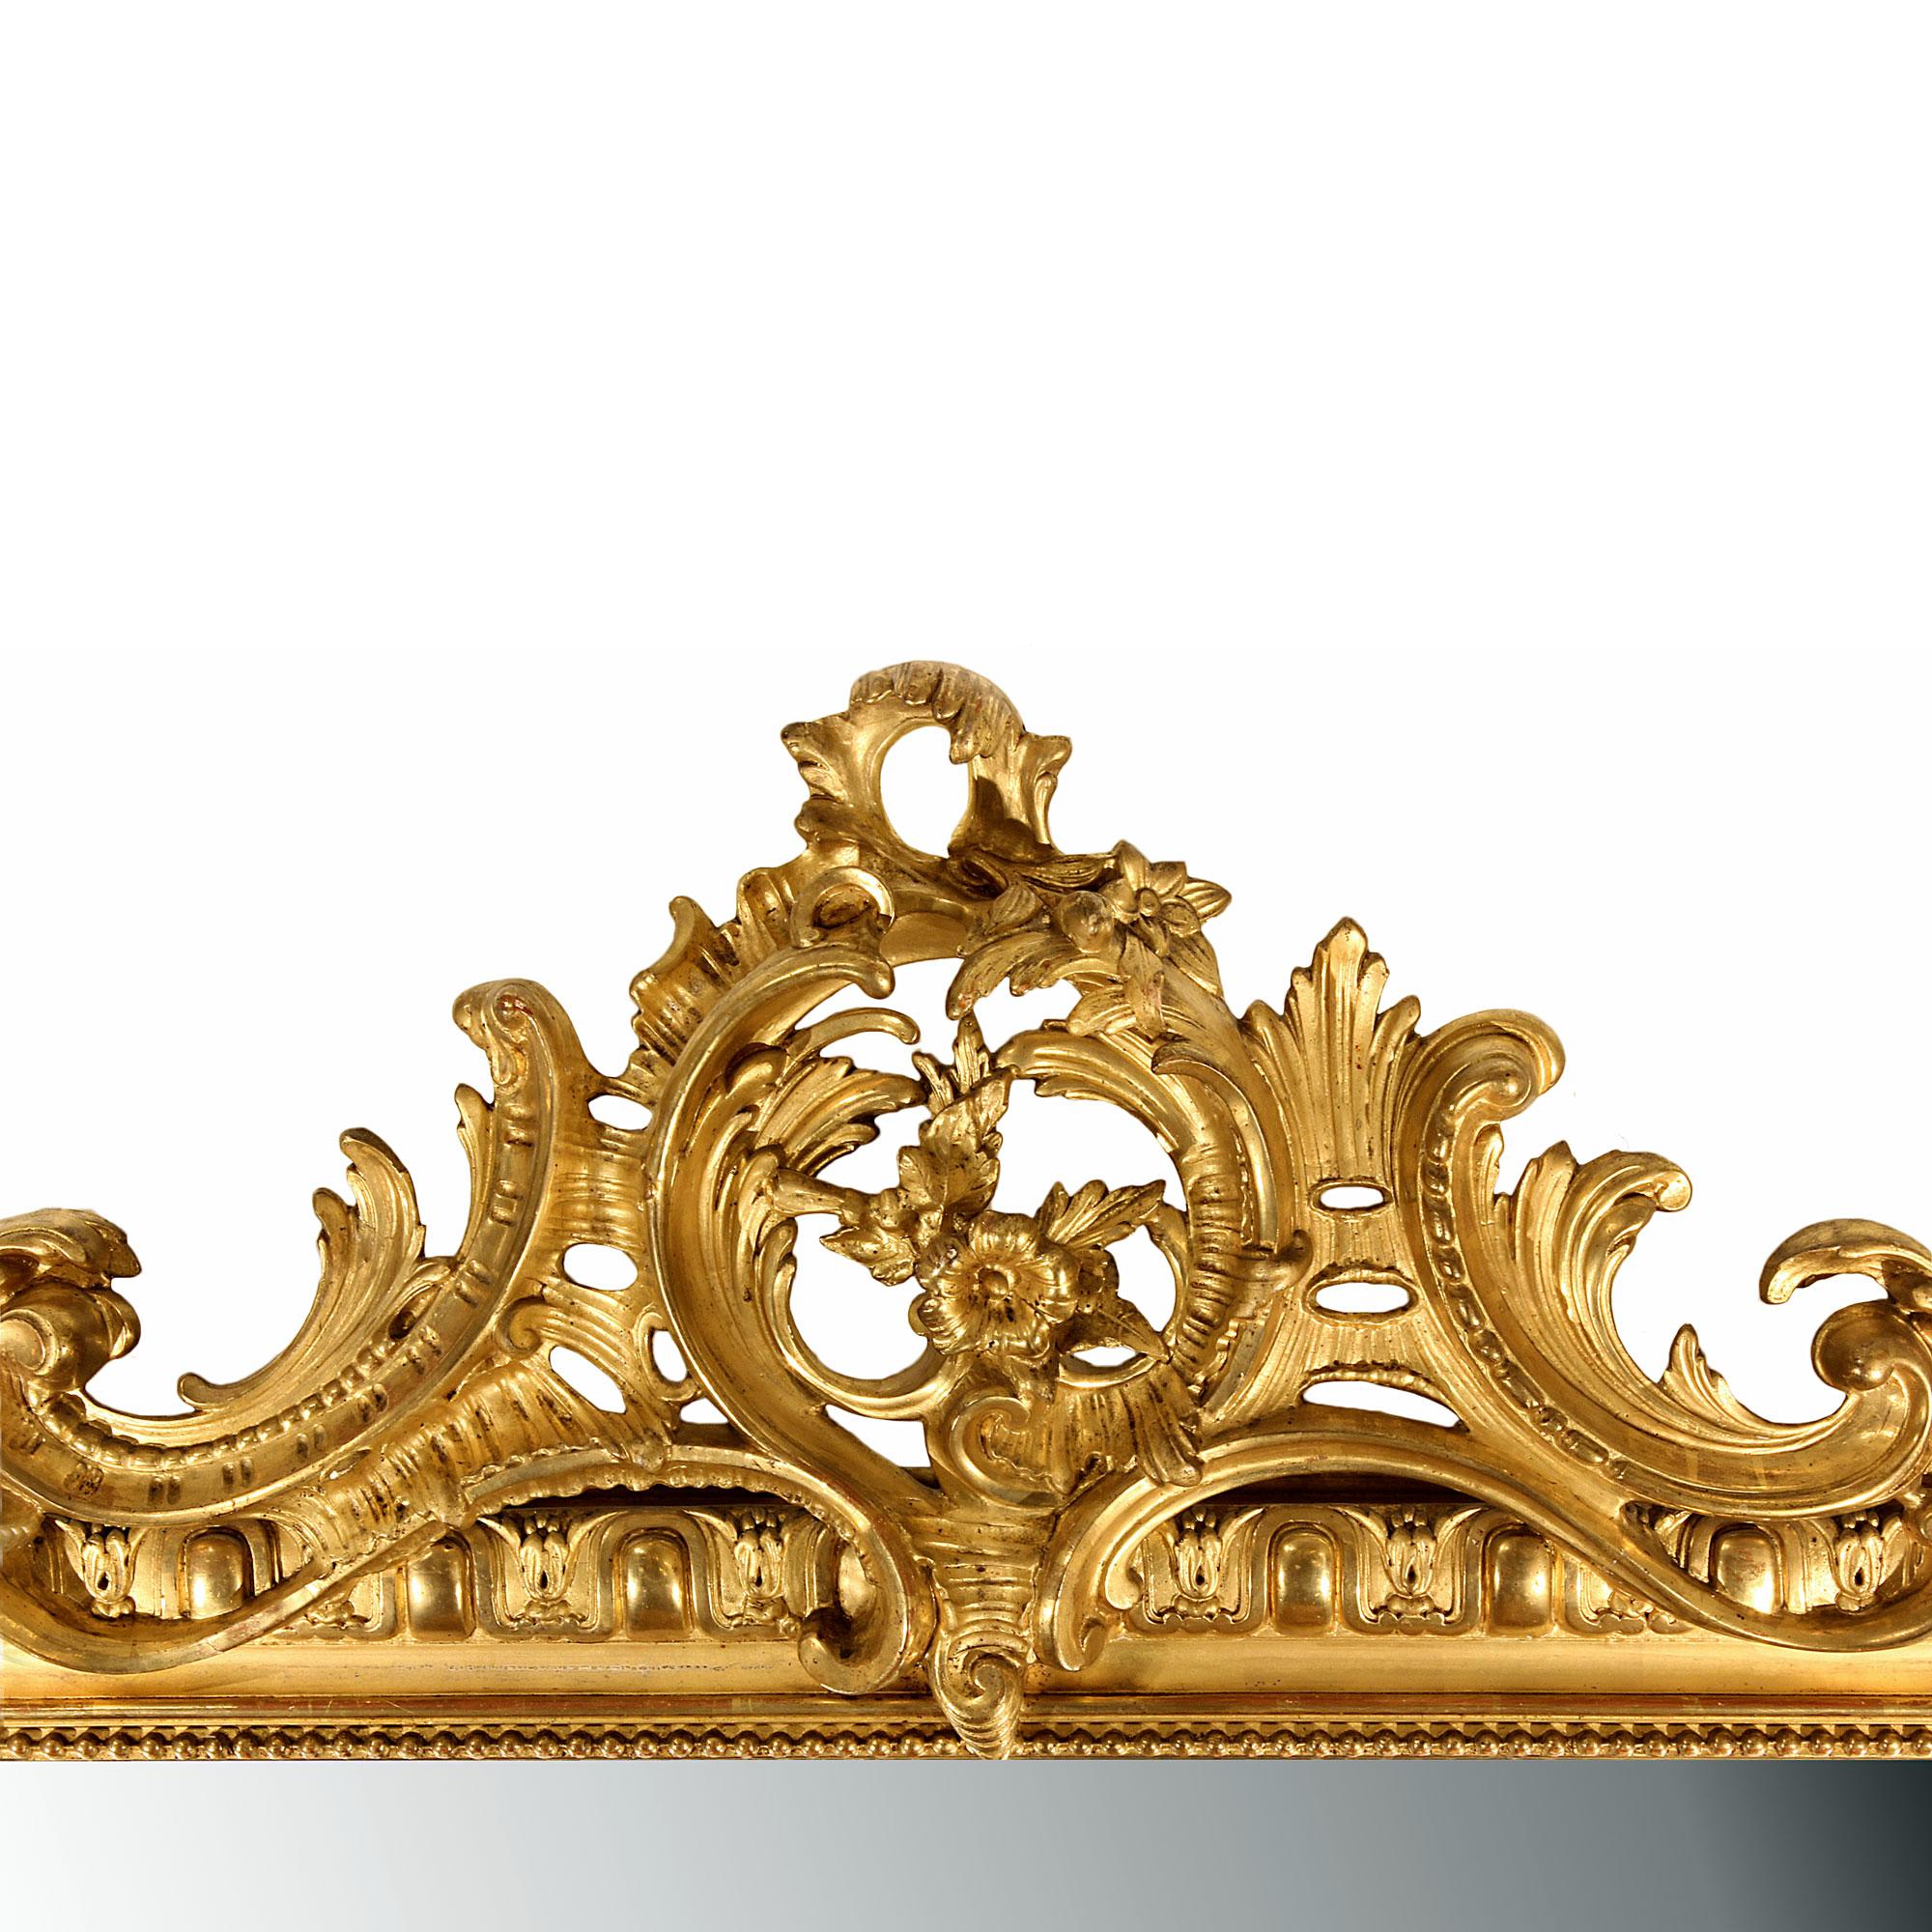 A very elegant mid 19th century French Louis XVI st. giltwood mirror. The richly decorated frame has a large S scrolled acanthus leaf with flowers at the bottom. The vertical sides have an outer egg and dart design and an inner beaded trim. The top